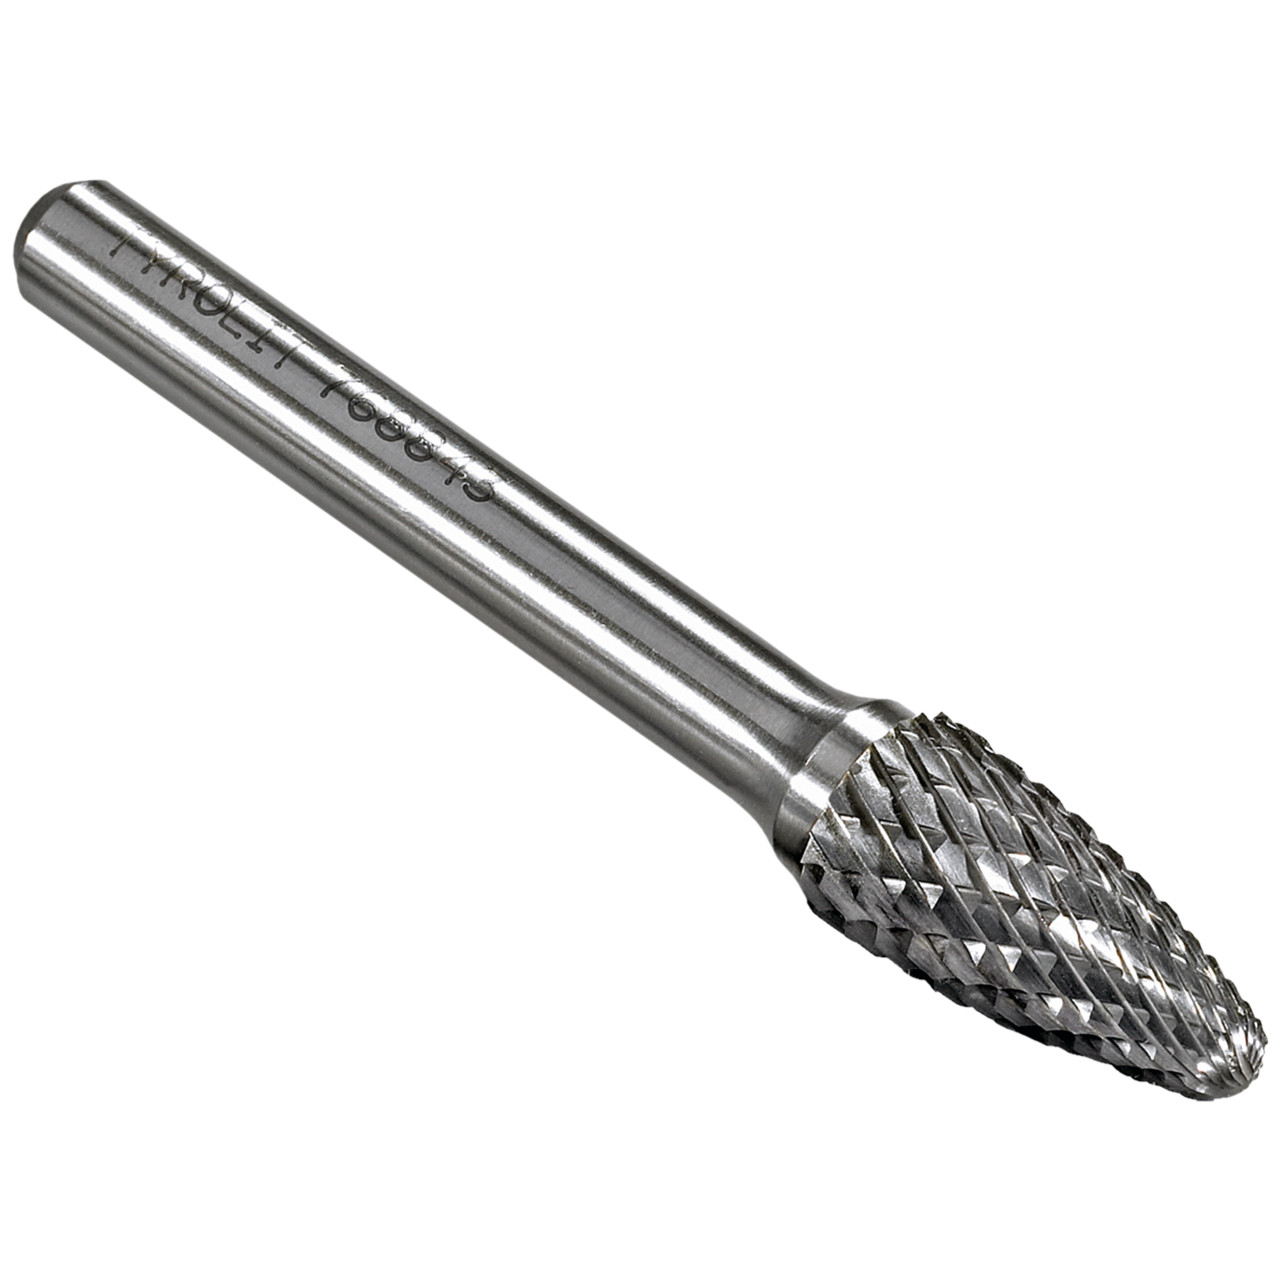 TYROLIT carbide end mill DxT-SxL 12x25-6x70 For cast iron, steel and stainless steel, shape: 52RBF - tree, Art. 768846